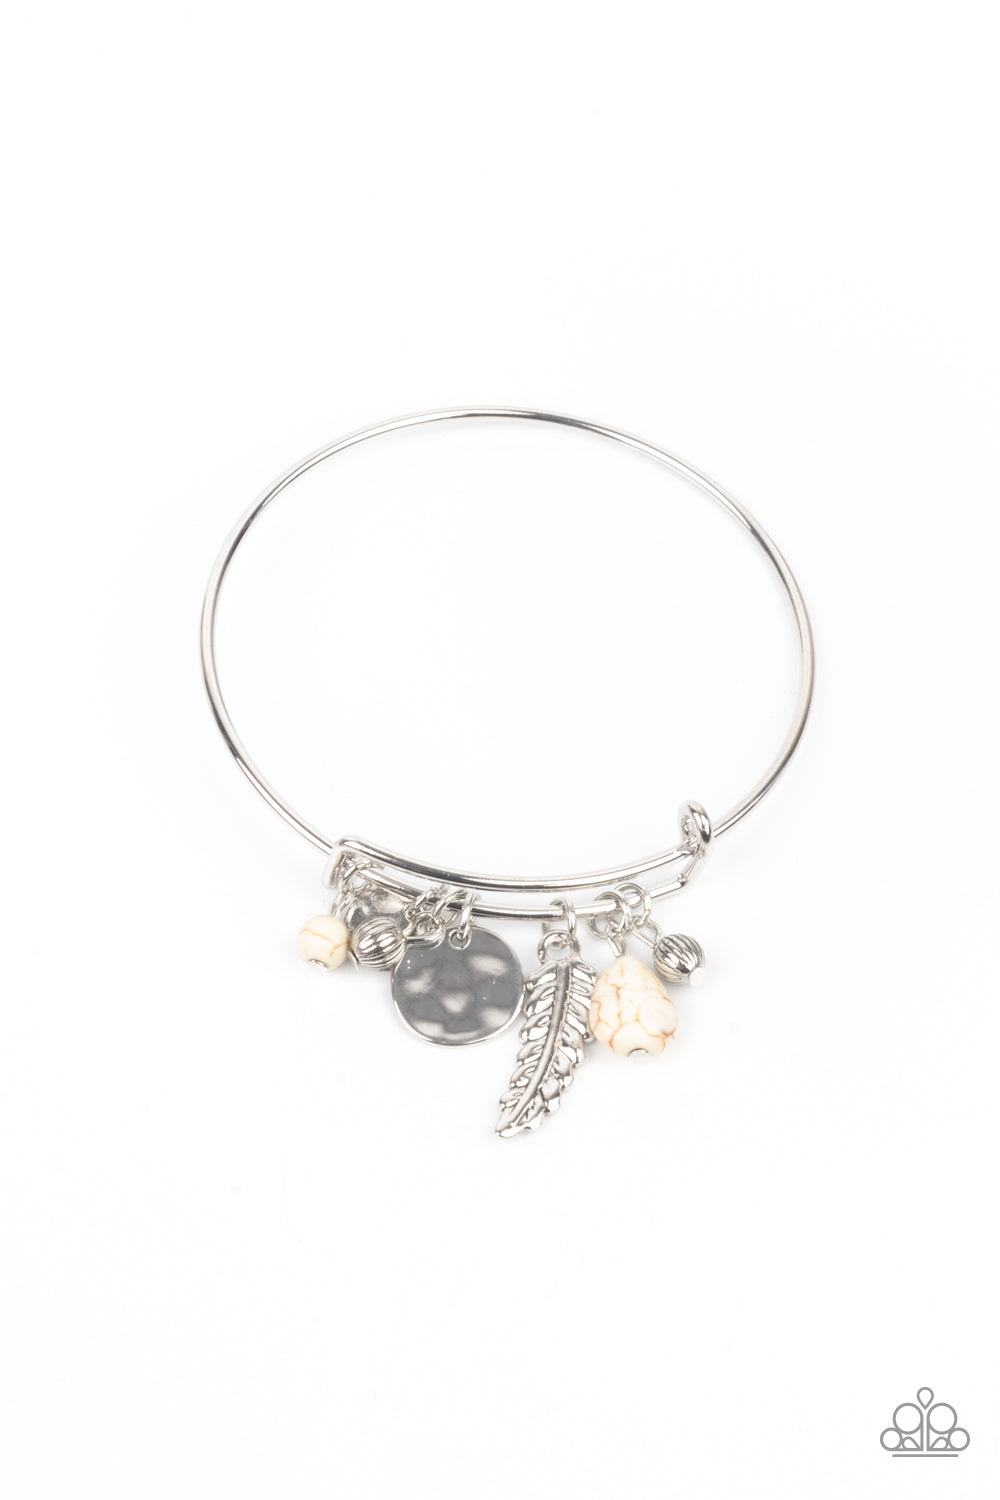 Root and RANCH White Bracelet - Paparazzi Accessories  Featuring a shimmery silver feather charm, ornate silver beads and earthy white stone beads glide along the fitted center of a dainty silver bangle for a whimsically charming look.  All Paparazzi Accessories are lead free and nickel free!  Sold as one individual bracelet.